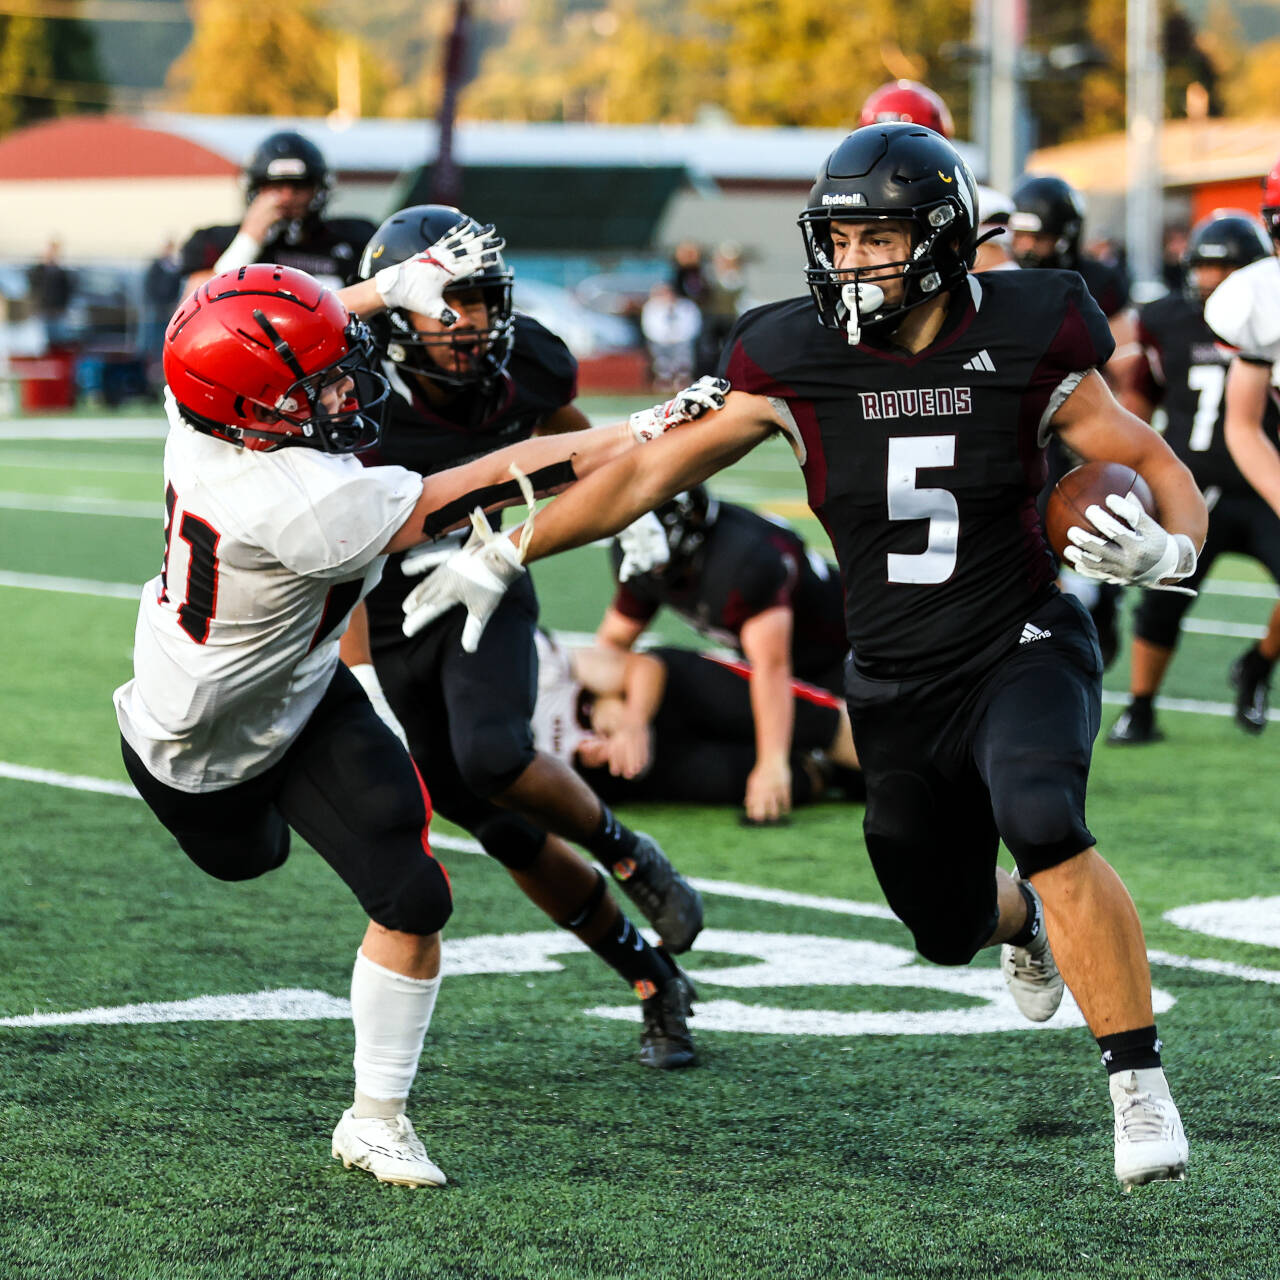 LARRY BALE | THE DAILY WORLD Raymond-South Bend running back Ferrill Johnson (5) rushed for 169 yards in a victory over Wahkiakum on Friday at South Bend High School.